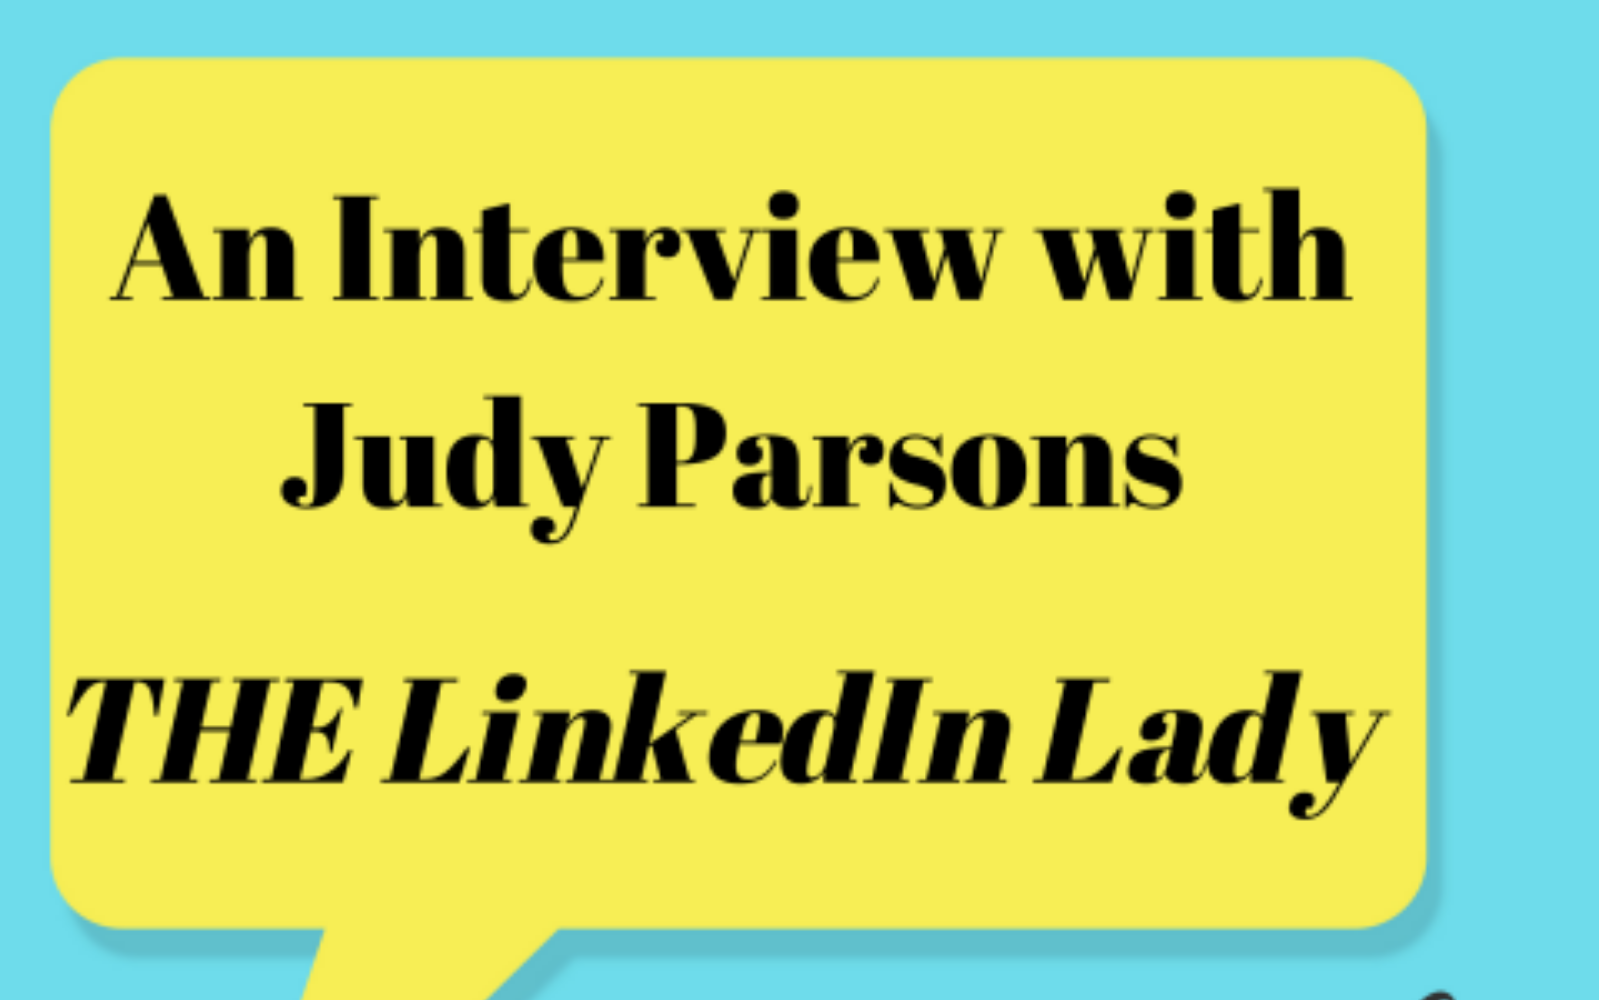 An-interview-with-Judy-Parsons-82d1aecb